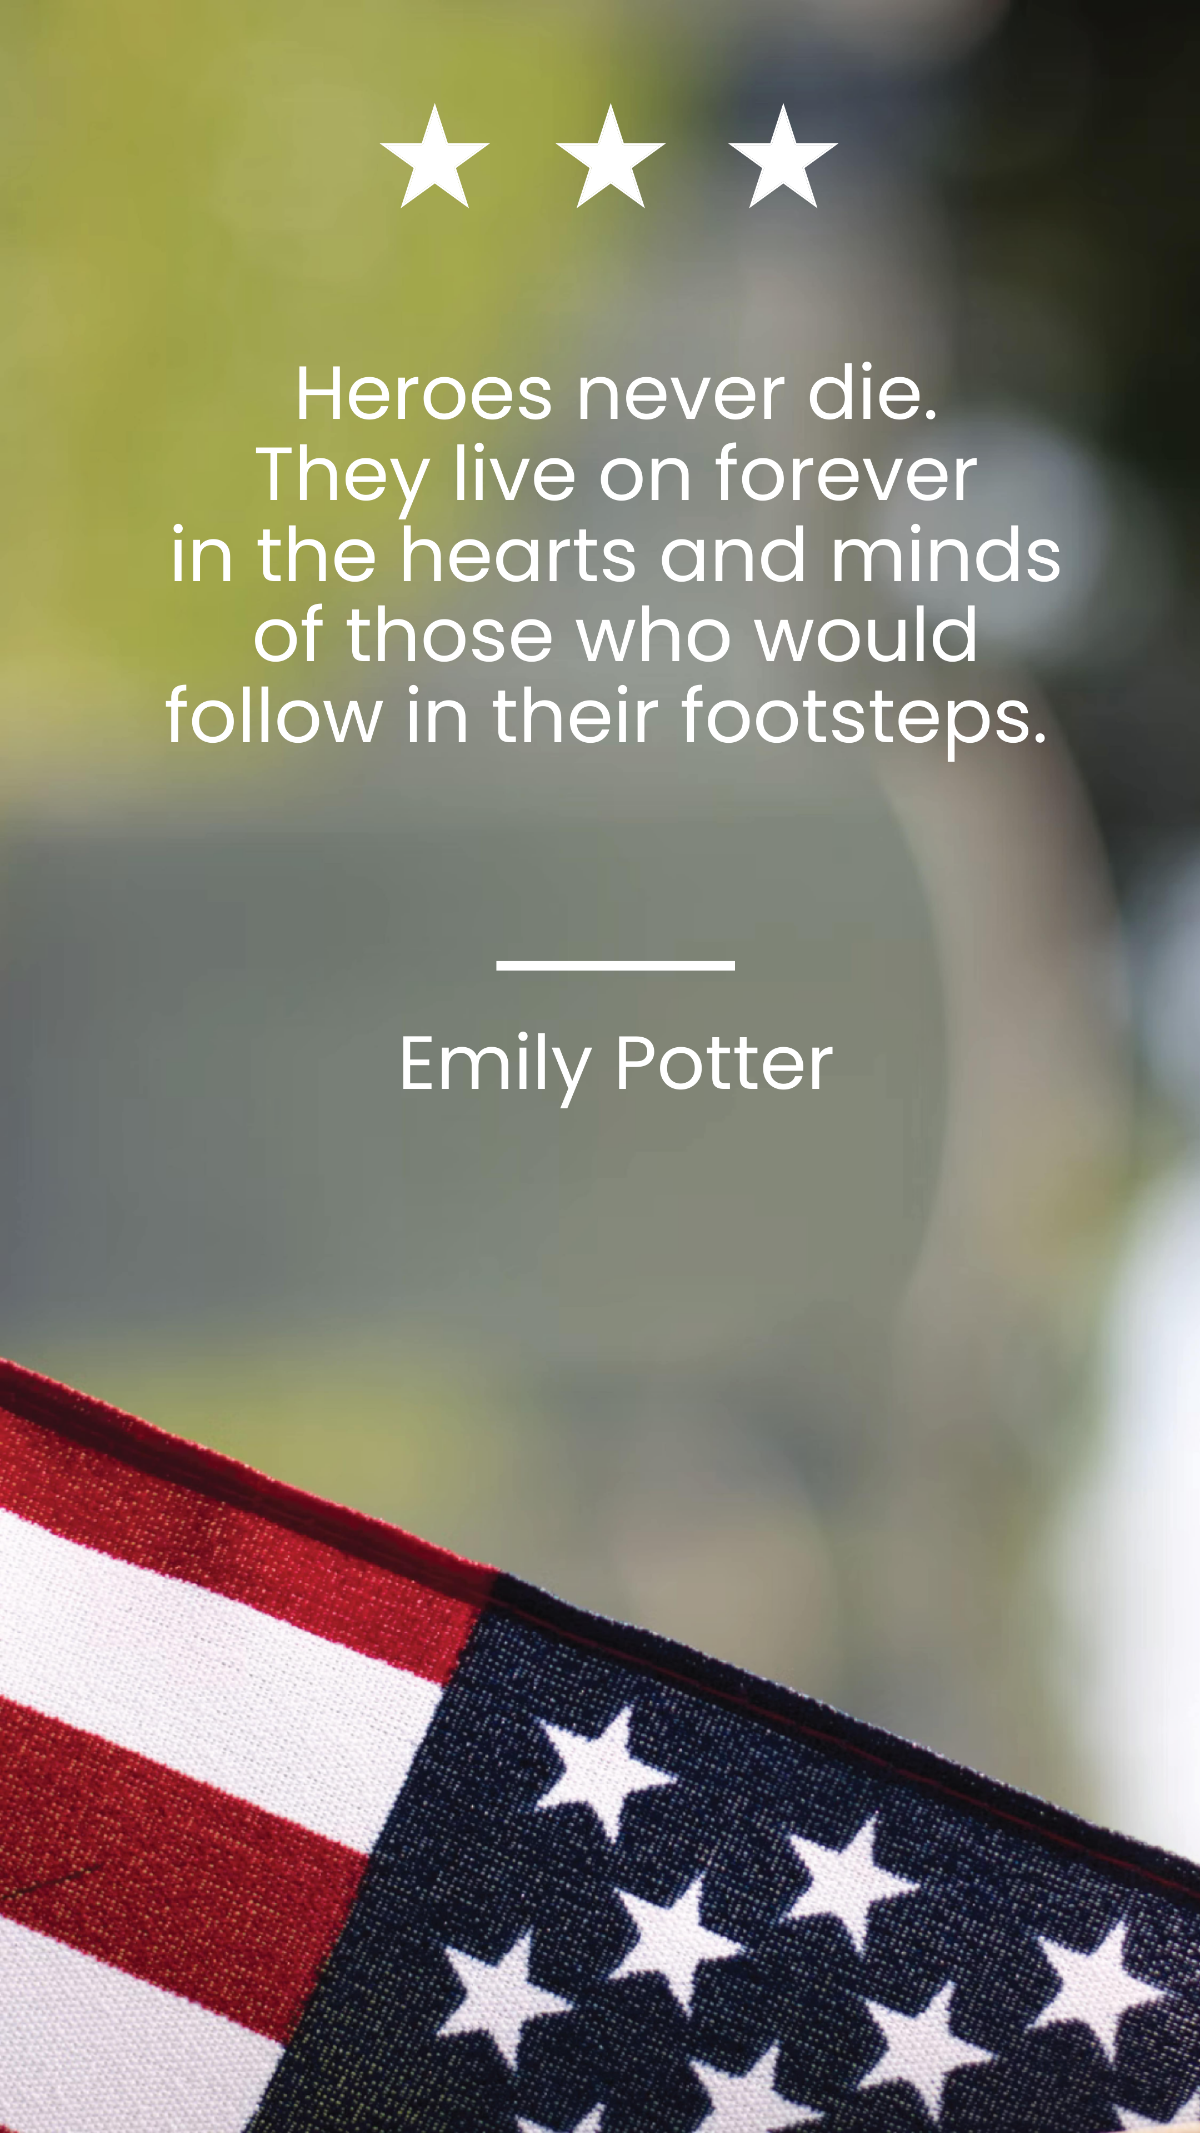 Free Emily Potter - Heroes never die. They live on forever in the hearts and minds of those who would follow in their footsteps. Template